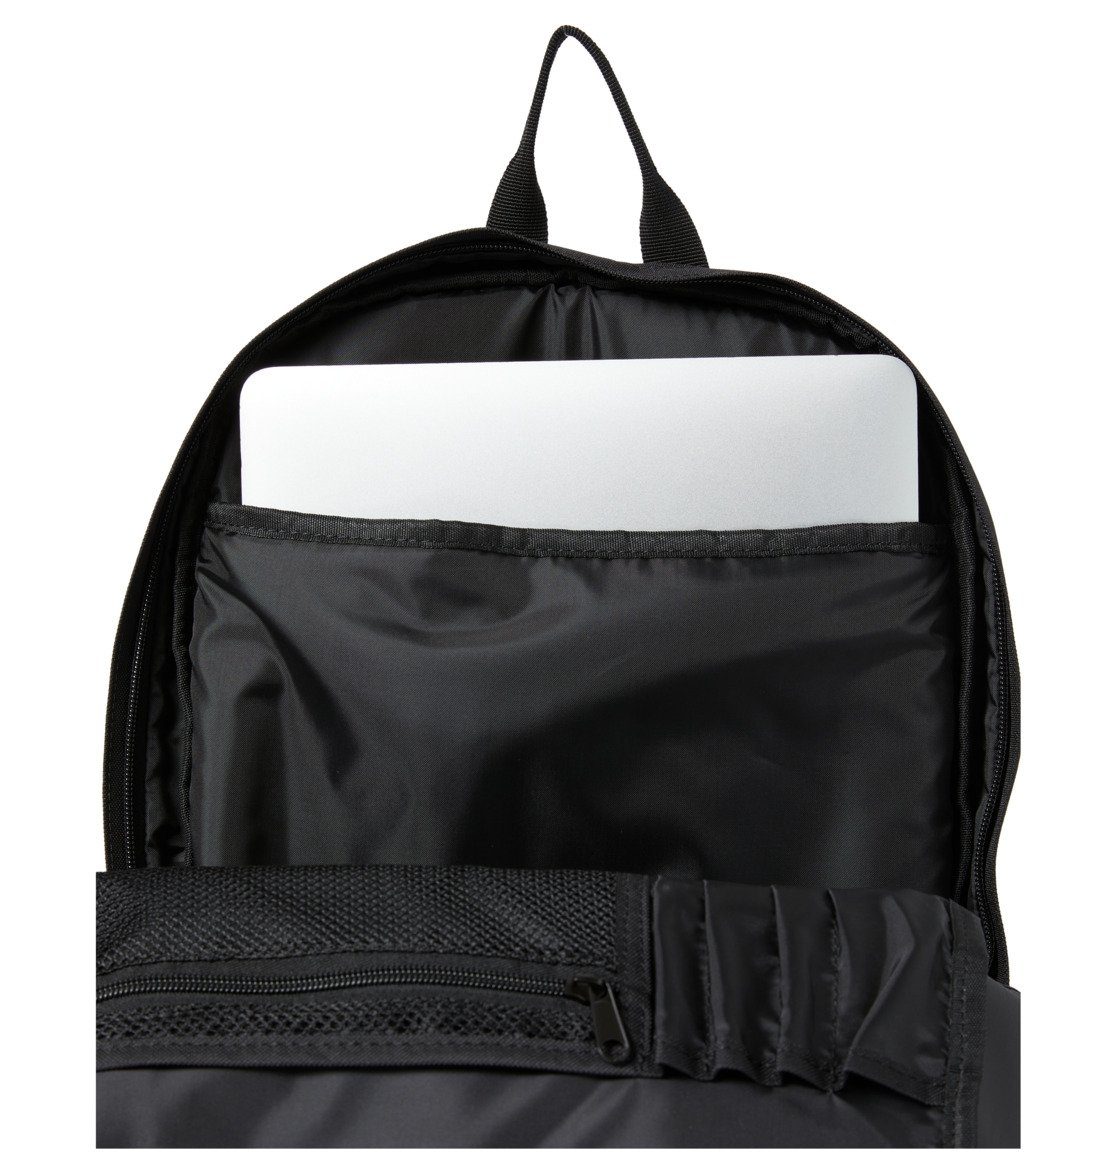 27L Shoes City All Tagesrucksack DC